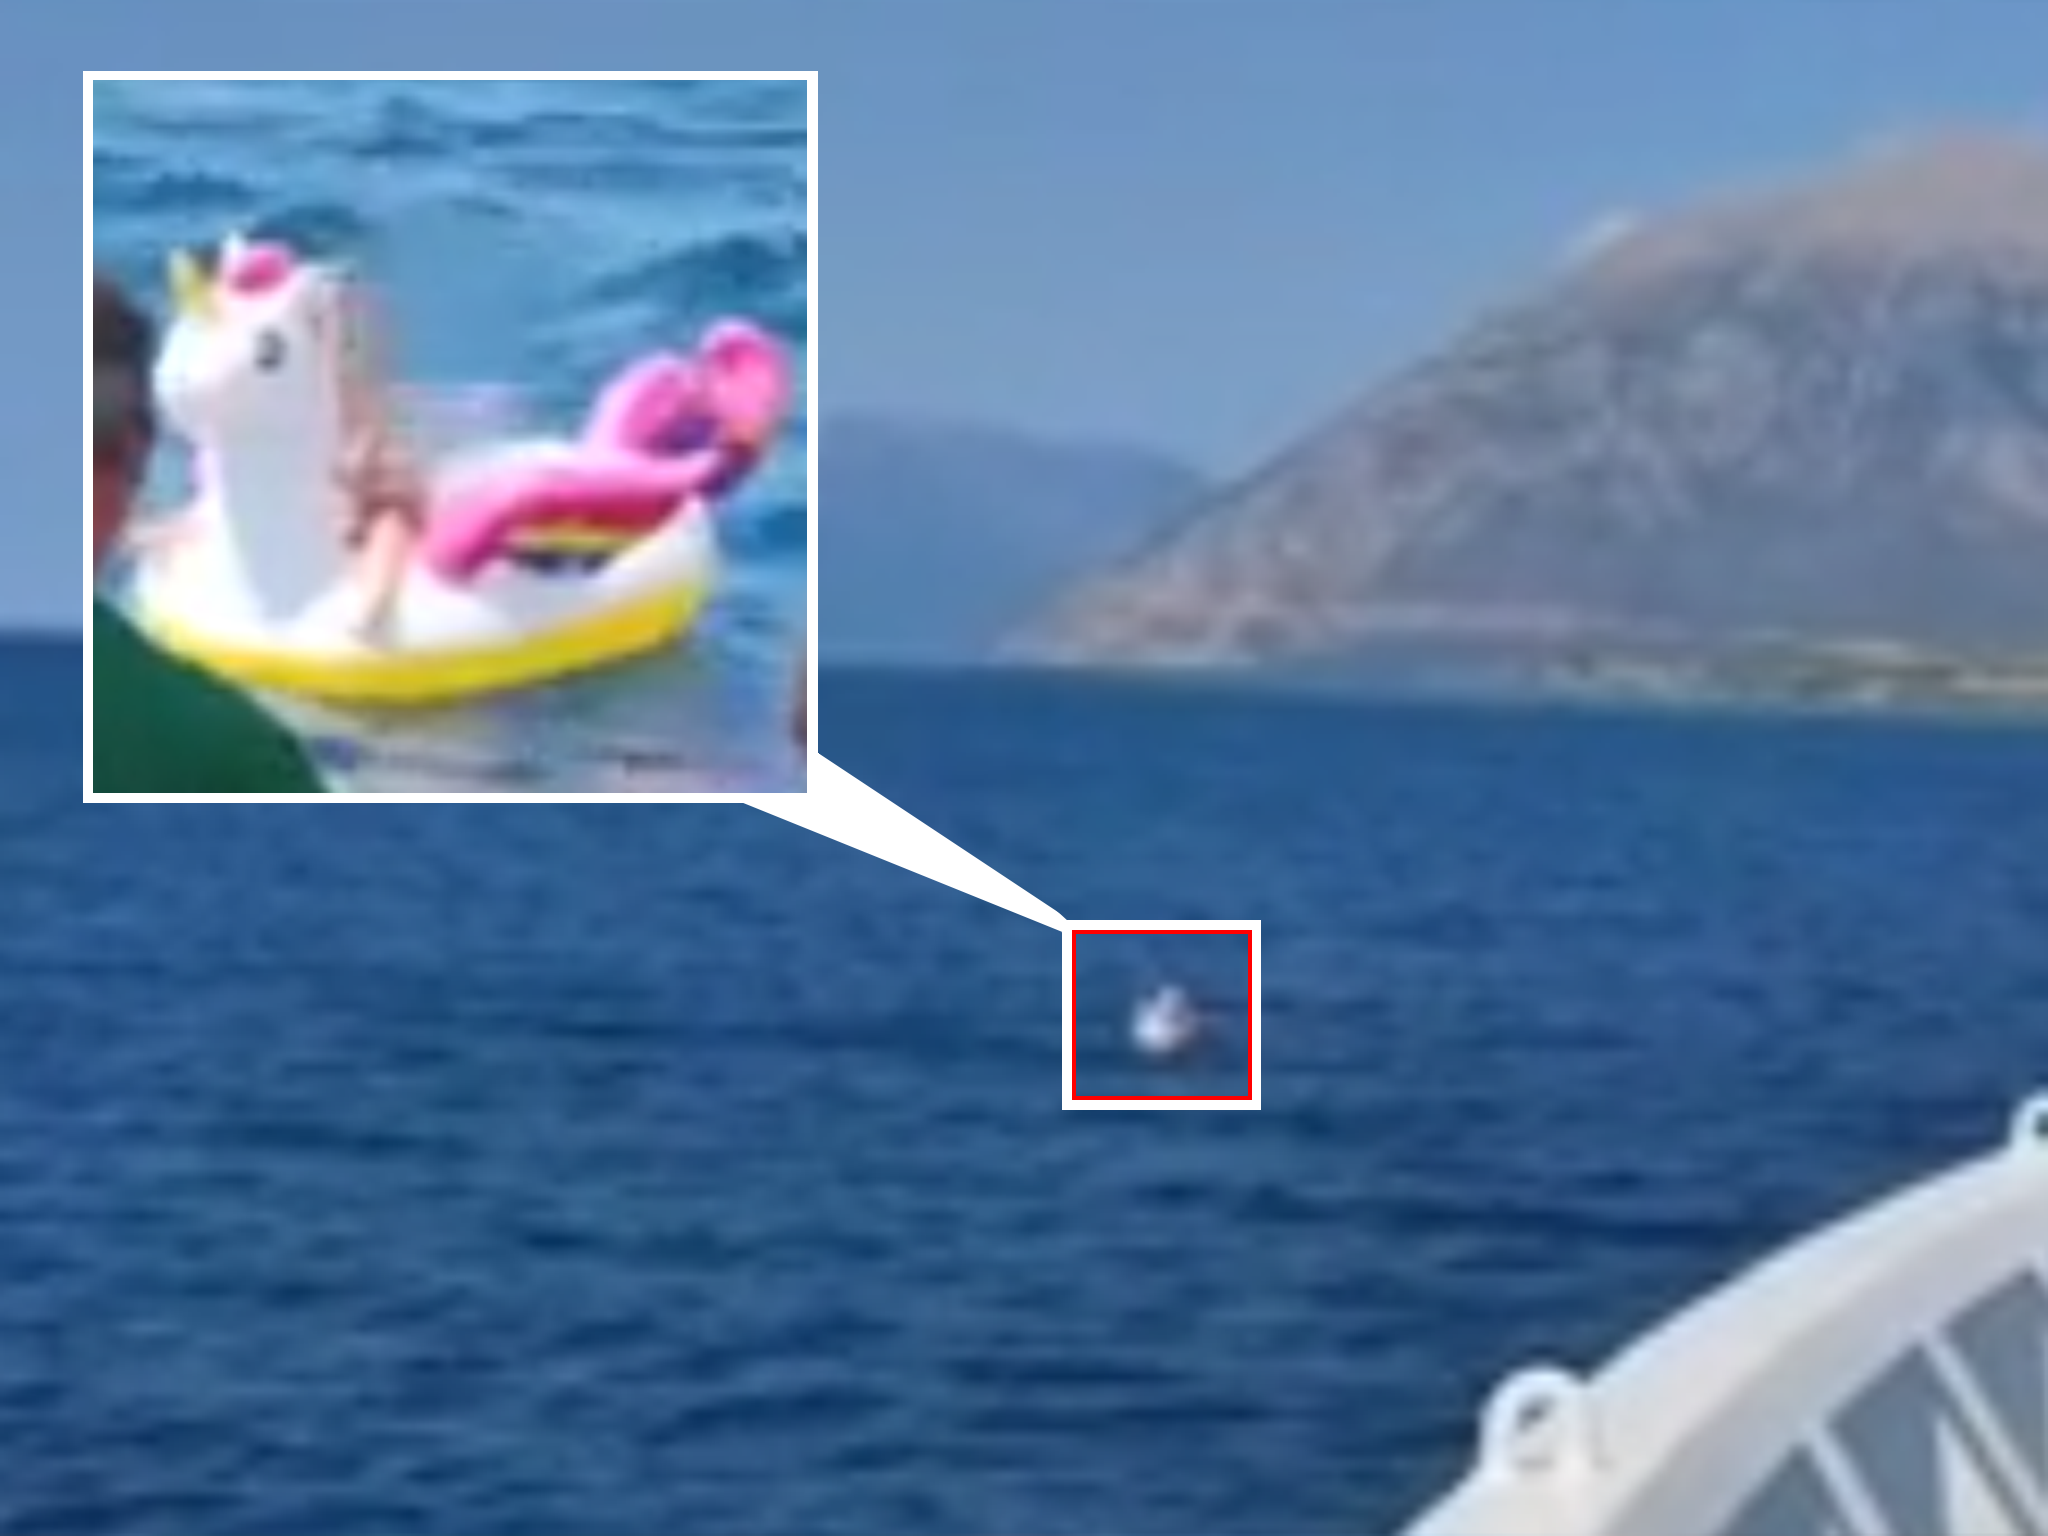 A girl was found floating on an inflatable unicorn